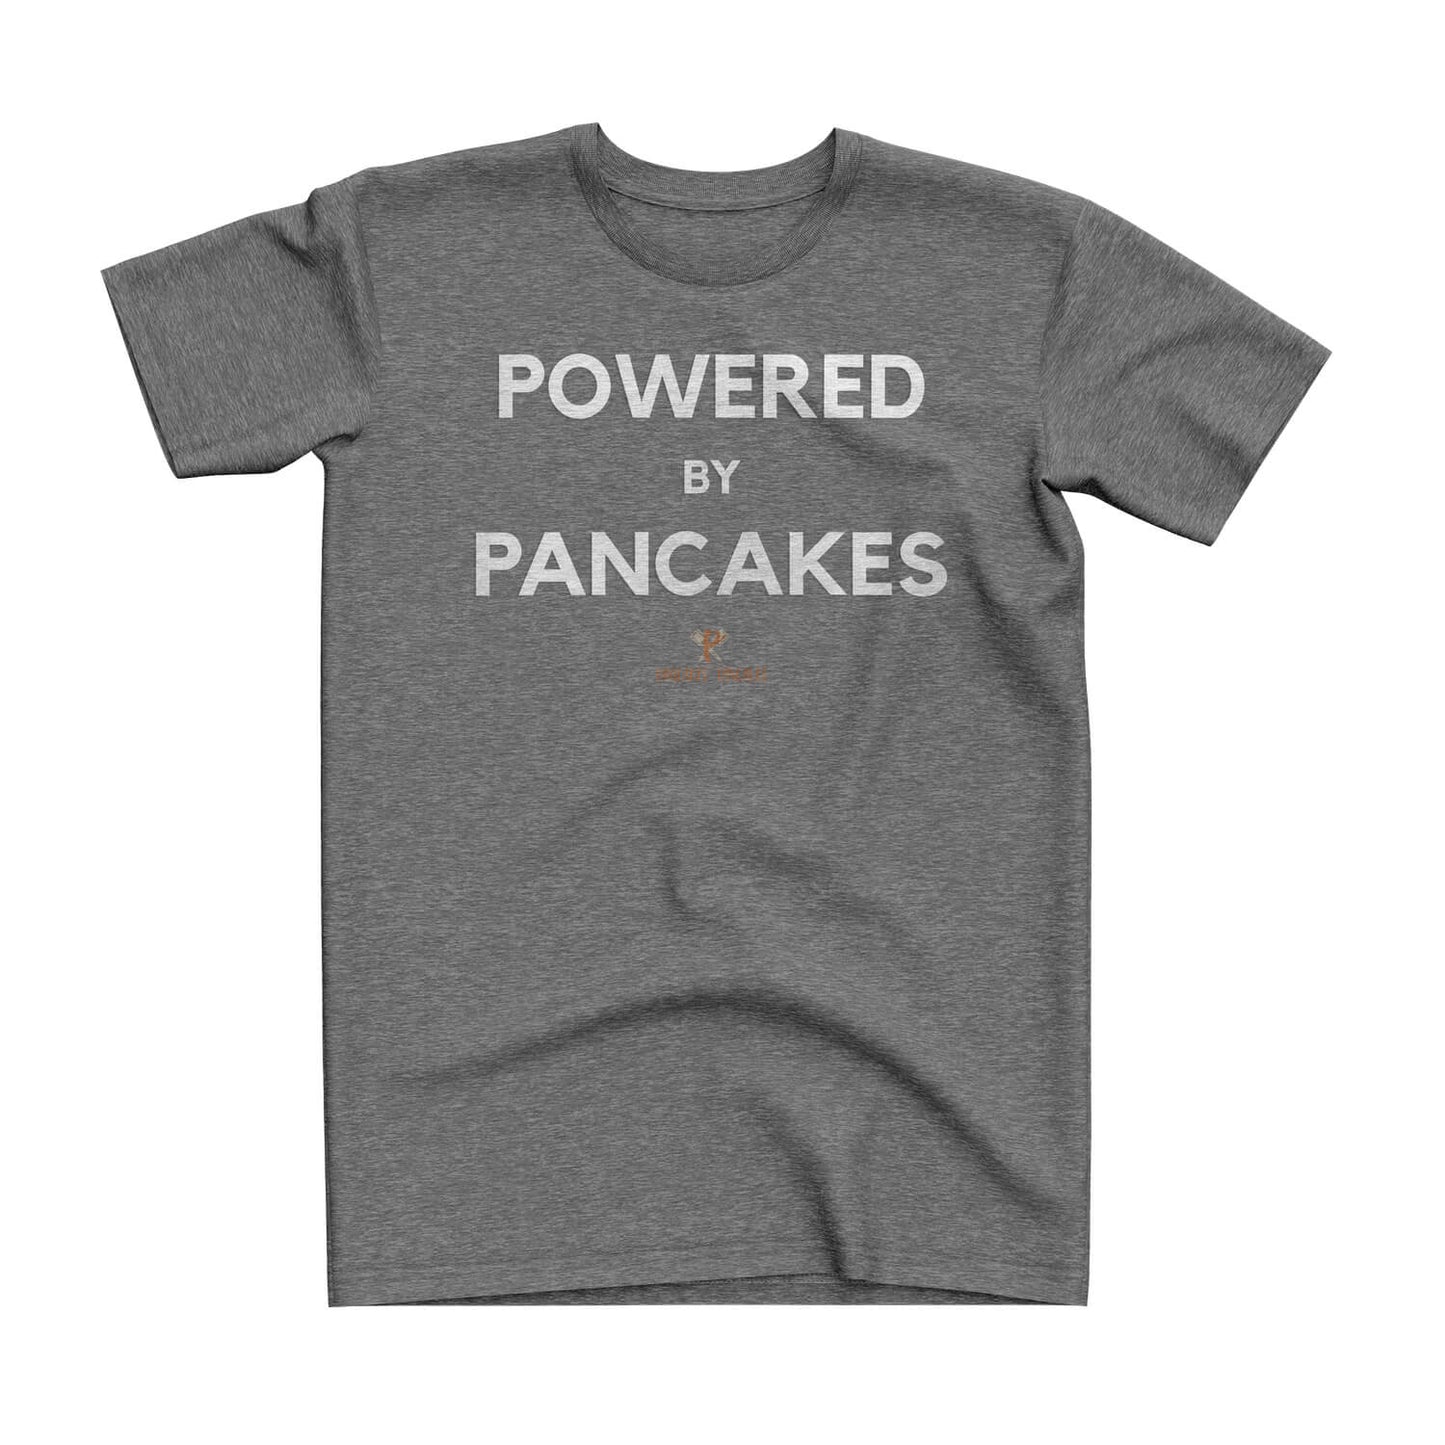 LIMITED EDITION POWERED BY PAMCAKES SHIRT